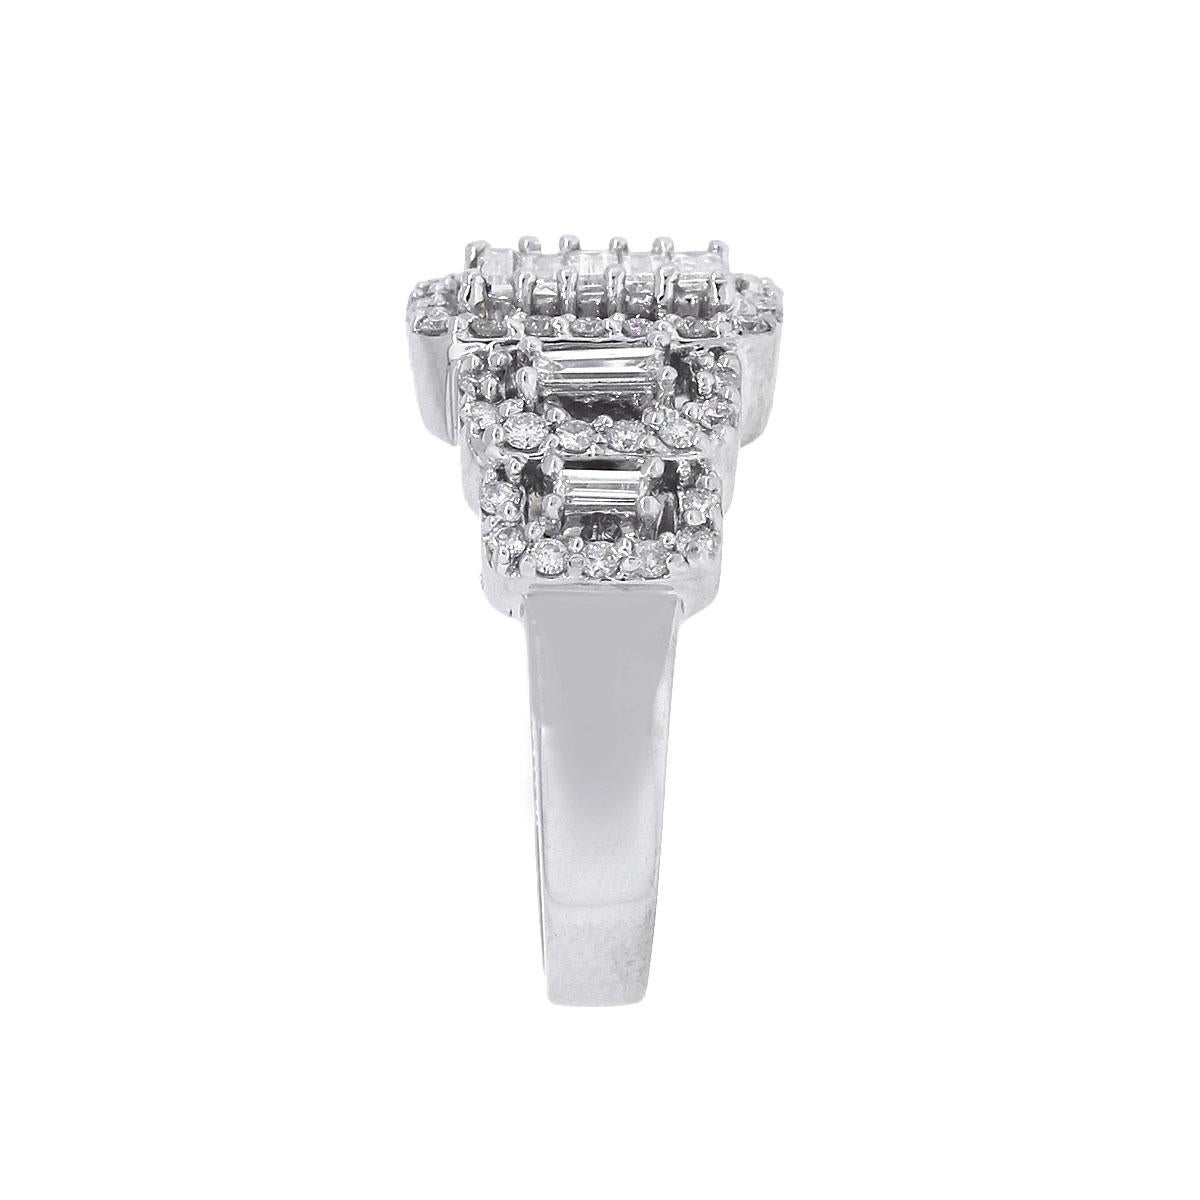 Material: 18k White Gold
Diamond Details: Approximately 1.25ctw of Round Brilliant and Baguette diamonds. Diamonds are G/H in color and SI in clarity
Size: 6.75
Total Weight: 7.1g (4.5dwt)
Measurements: 0.78″ x 0.46″ x 0.92″
SKU: R4851